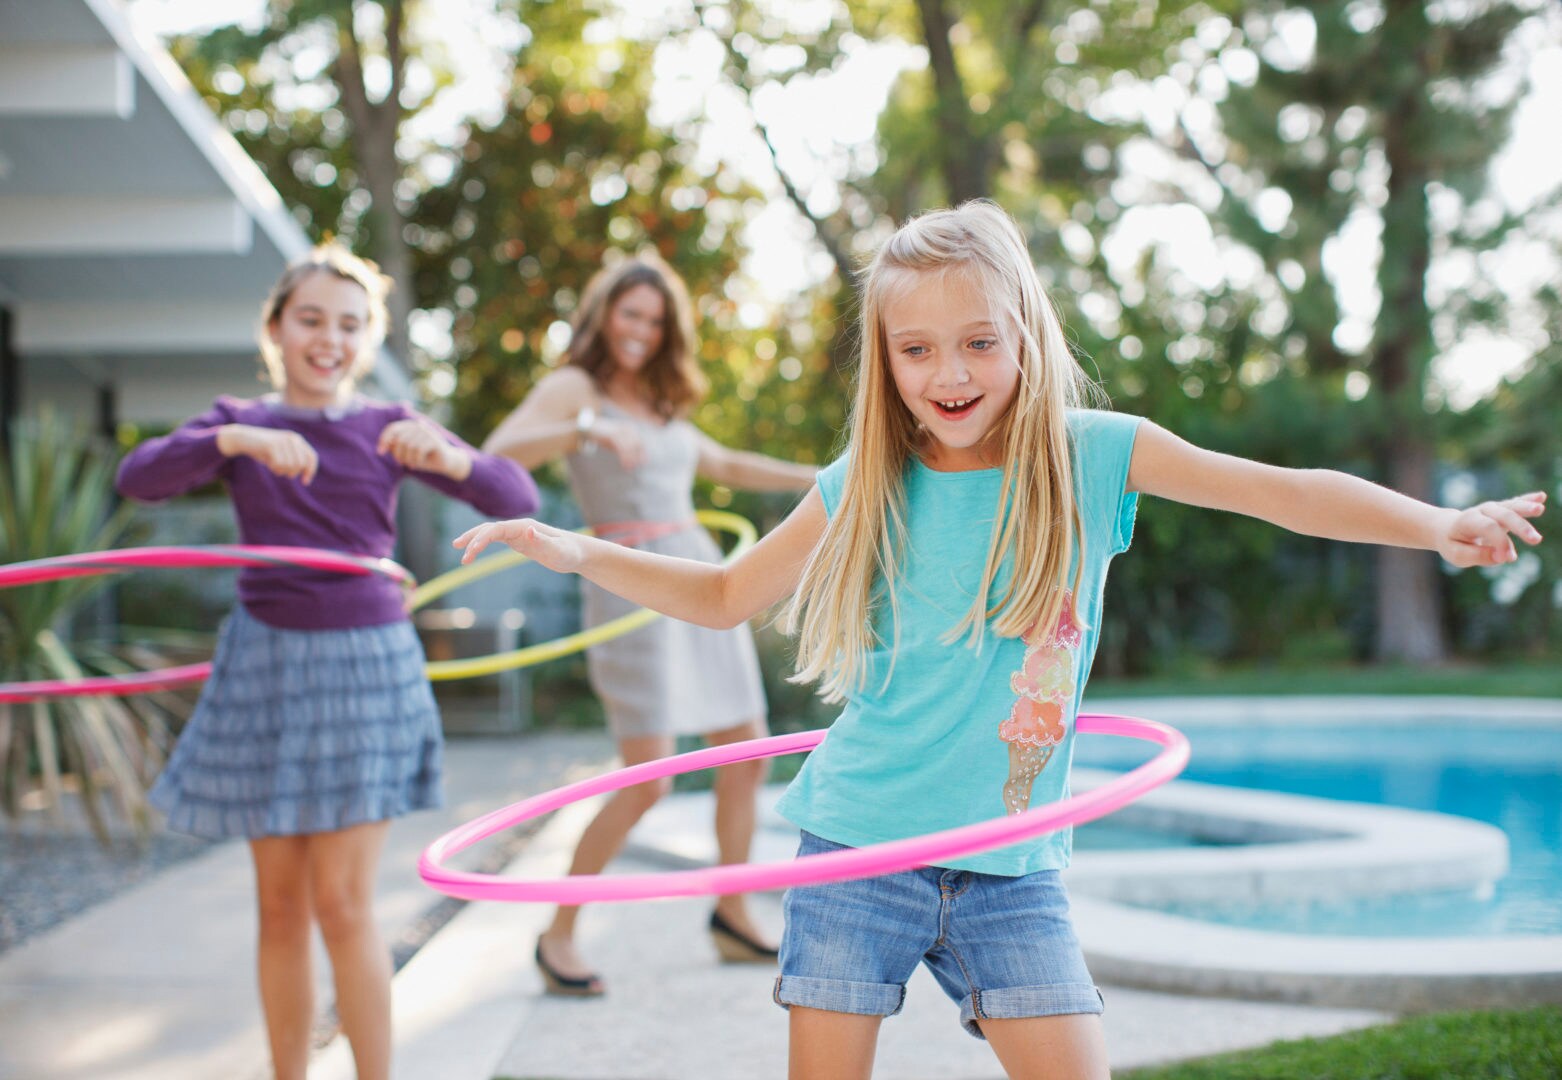 7 Activities for Summer Family Fun